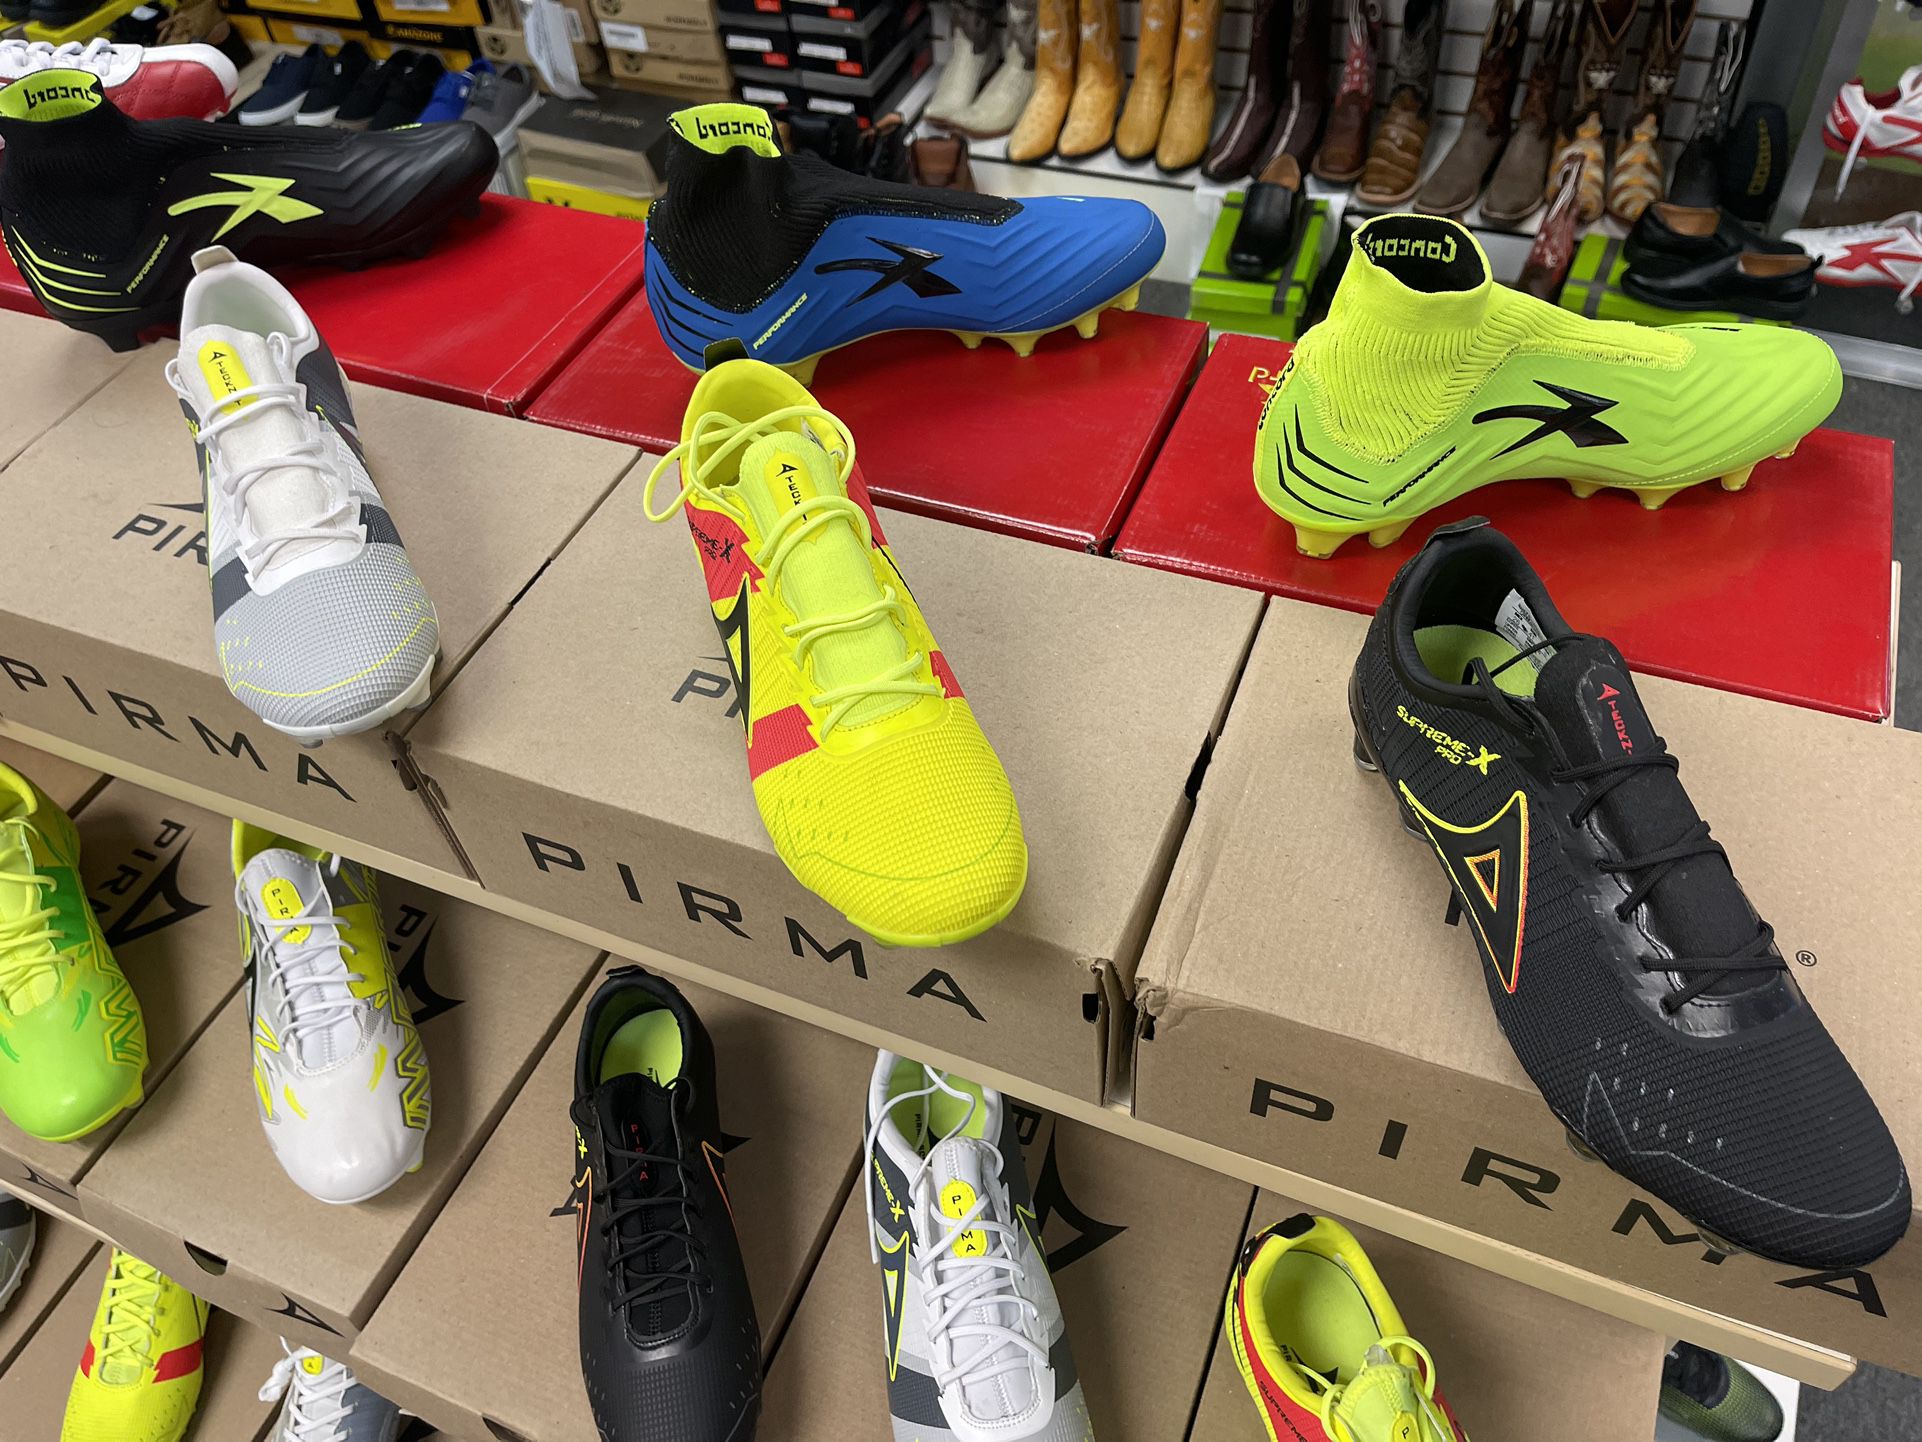 Prima Profesional Soccer Cleats Size 7 To 11.5 for Sale in Buena Park, CA -  OfferUp